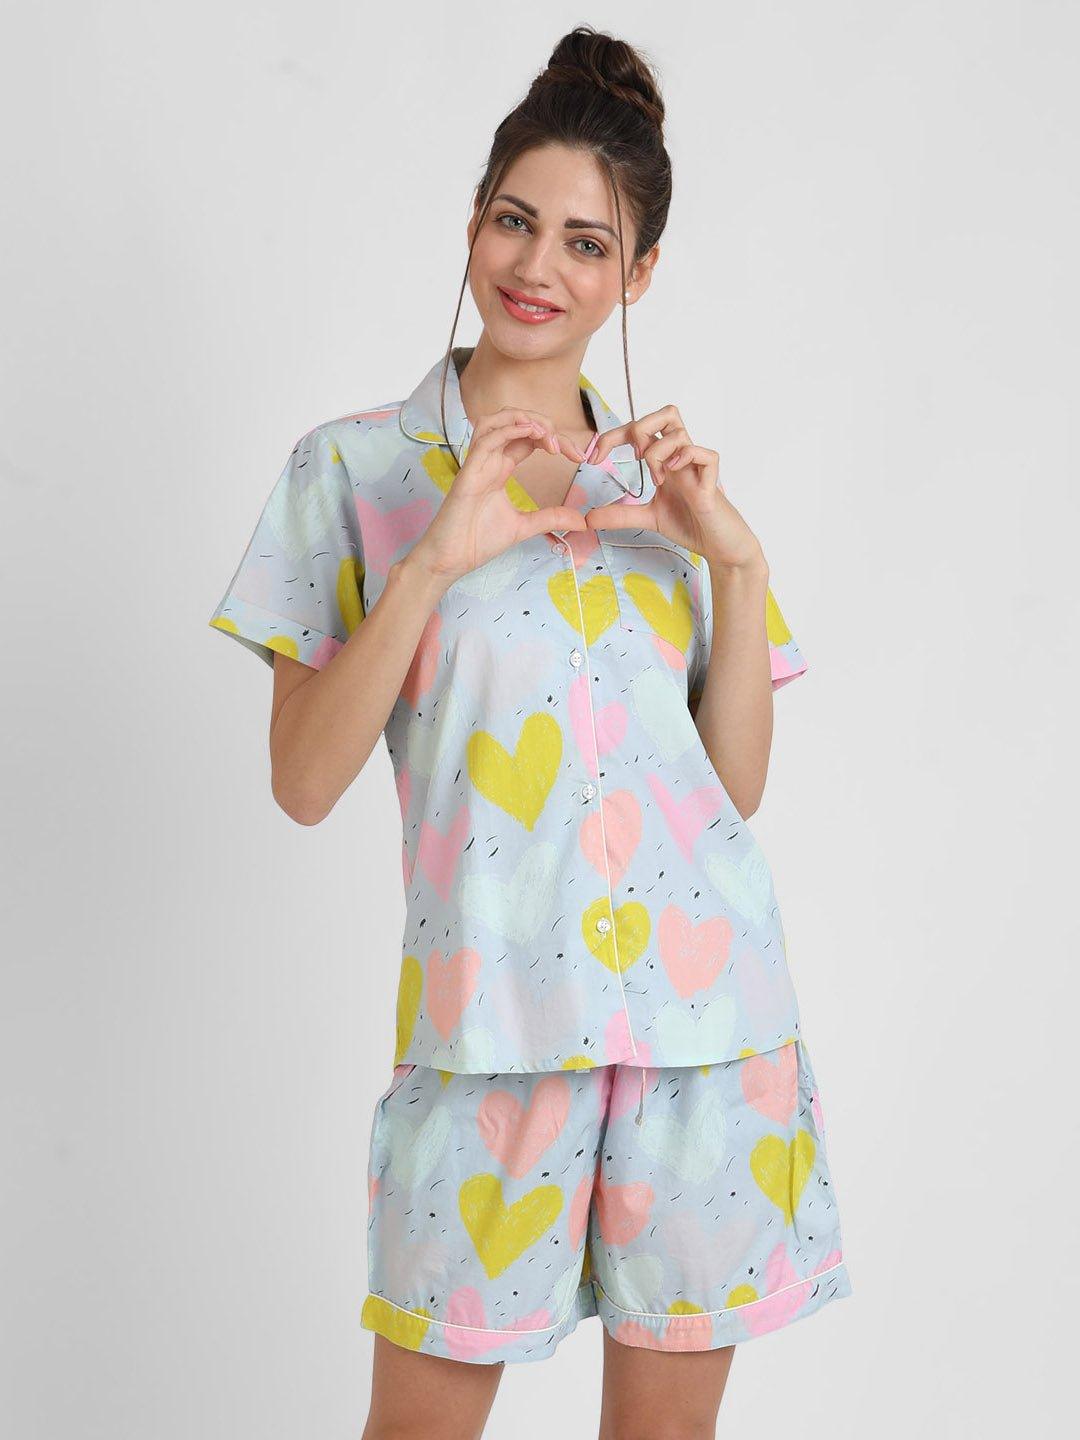 Grey Hearts Printed Nightsuit Set for Women